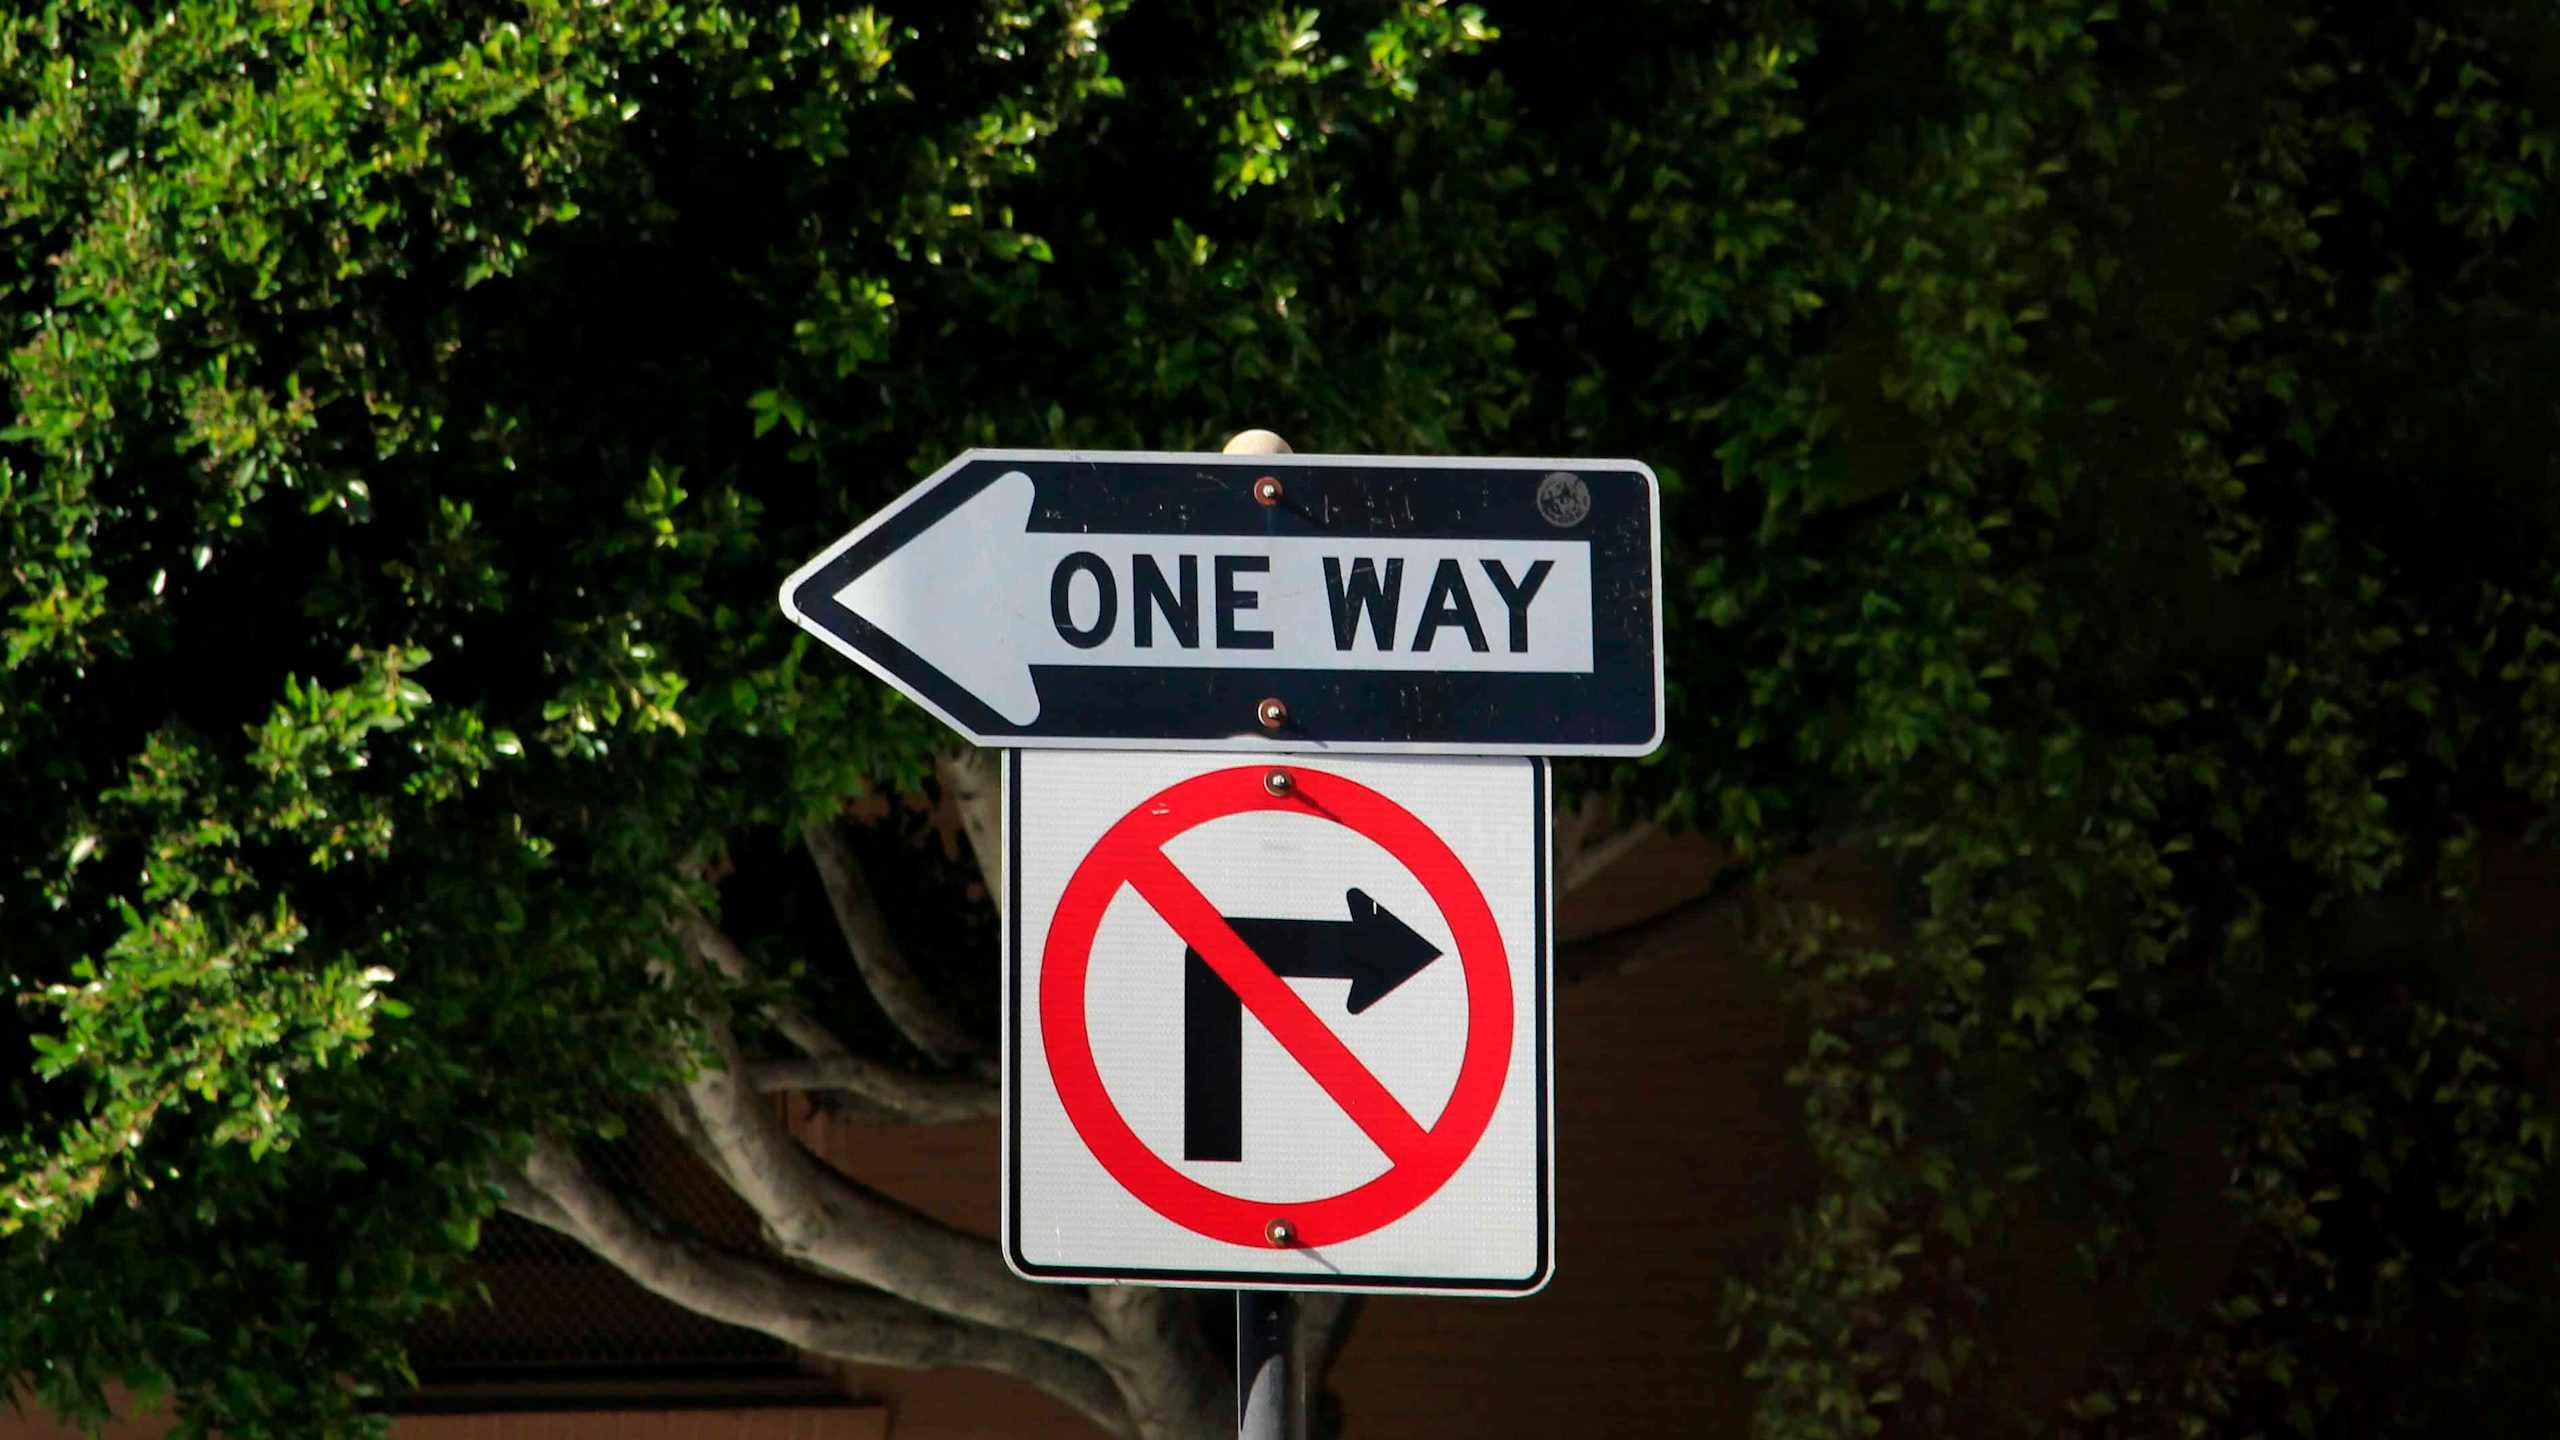 One-way traffic sign (in direction indicated) - Theory Test